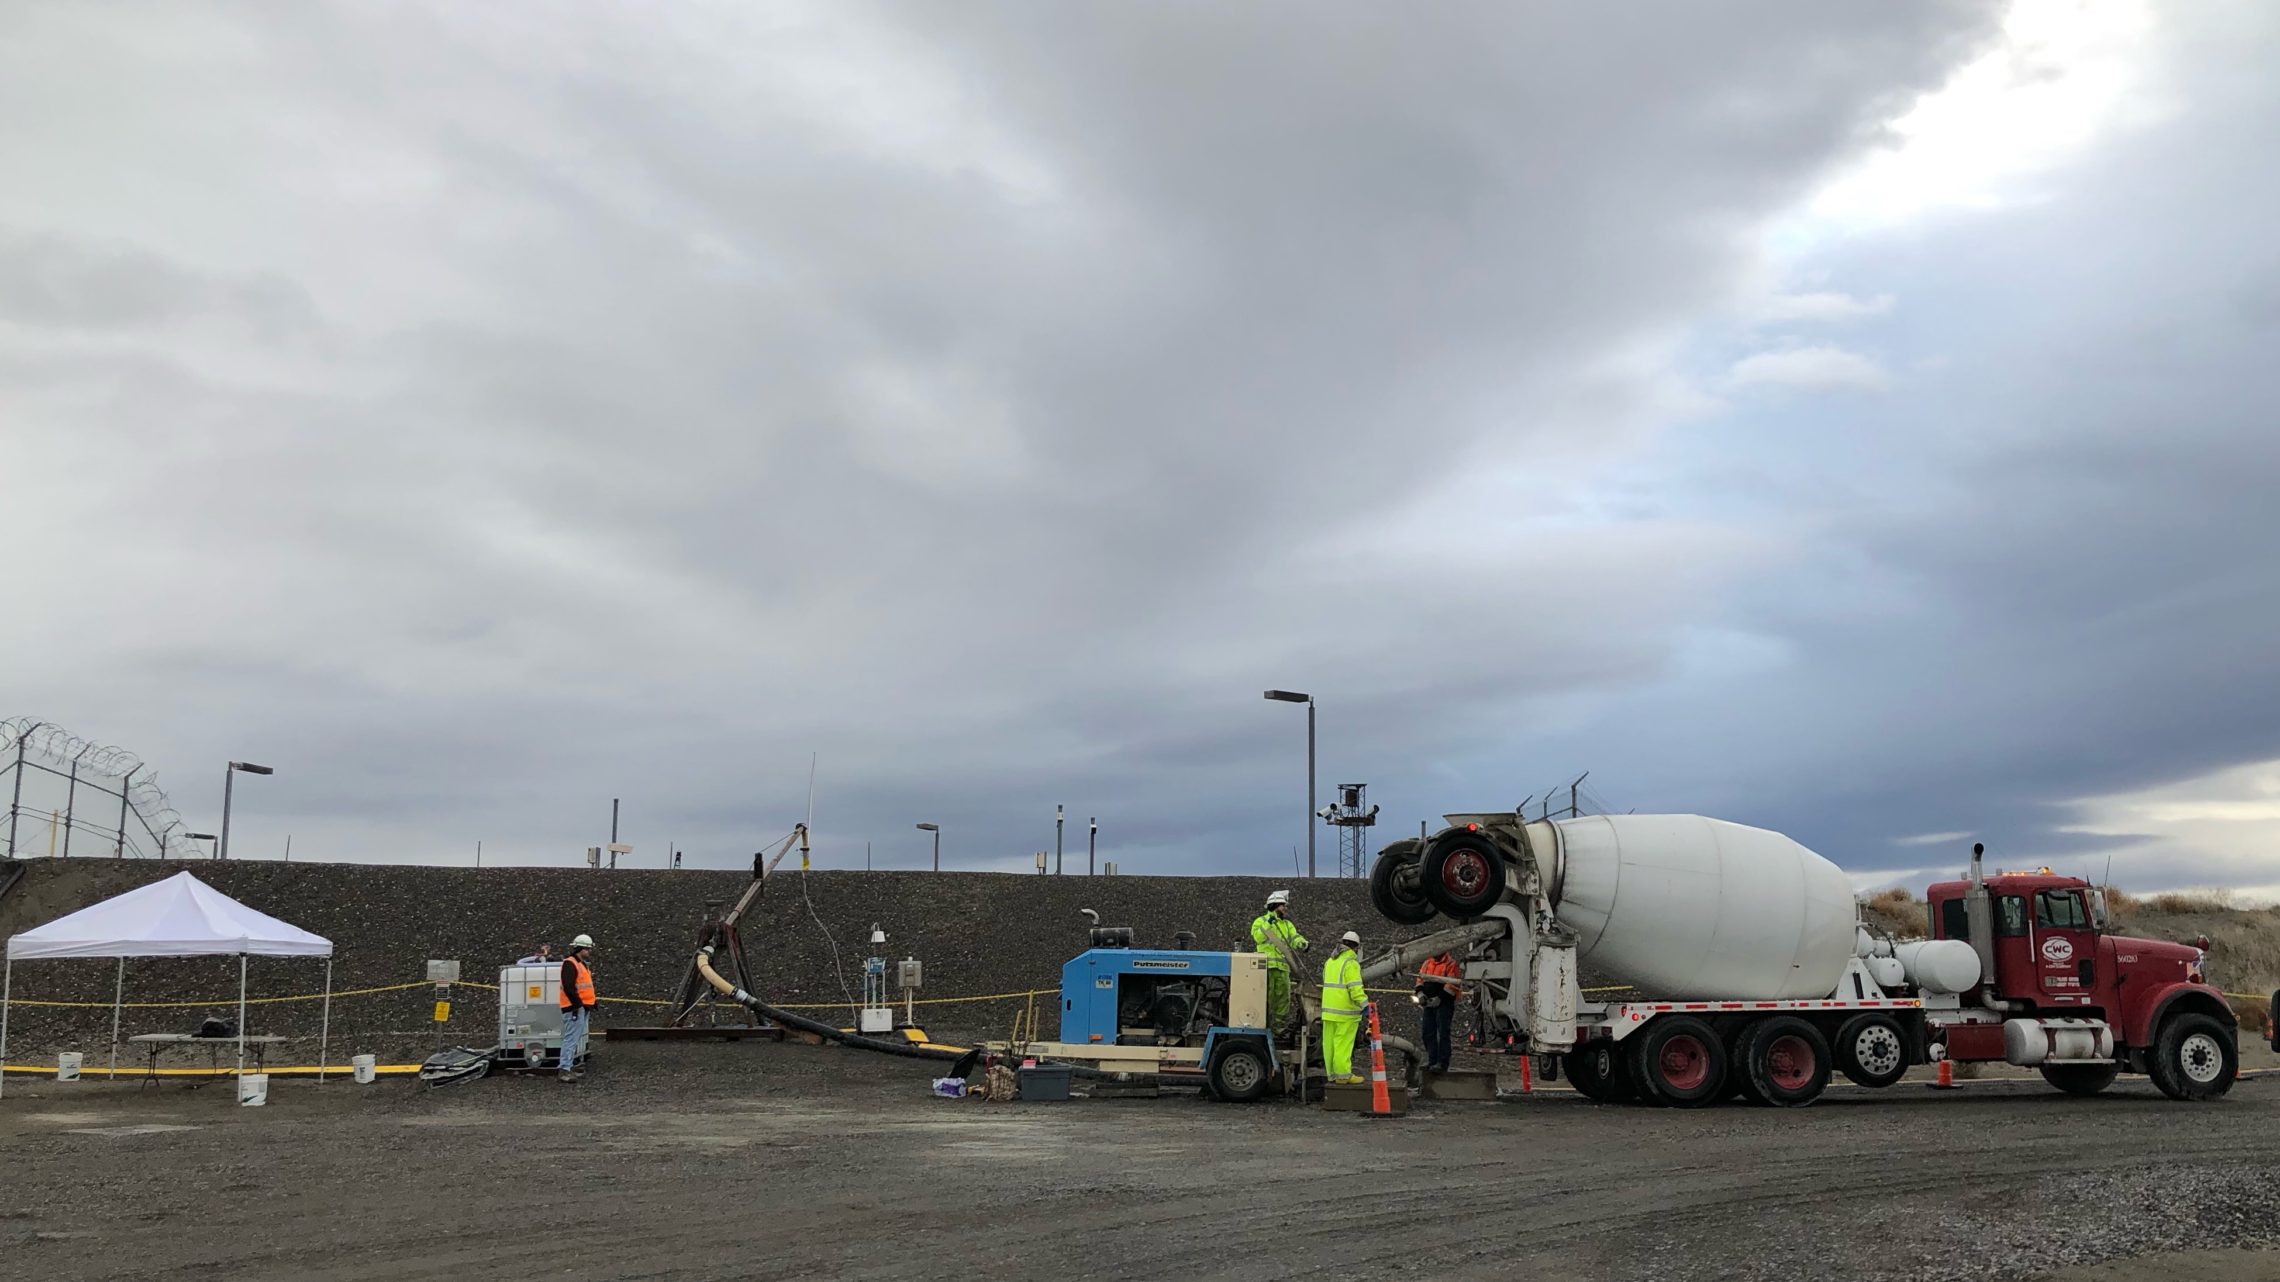 Hanford workers pump grout into a port on Tunnel 2. The tunnel is being sealed up so to lessen the risk of collapse that could endanger workers and the public. CREDIT: ANNA KING